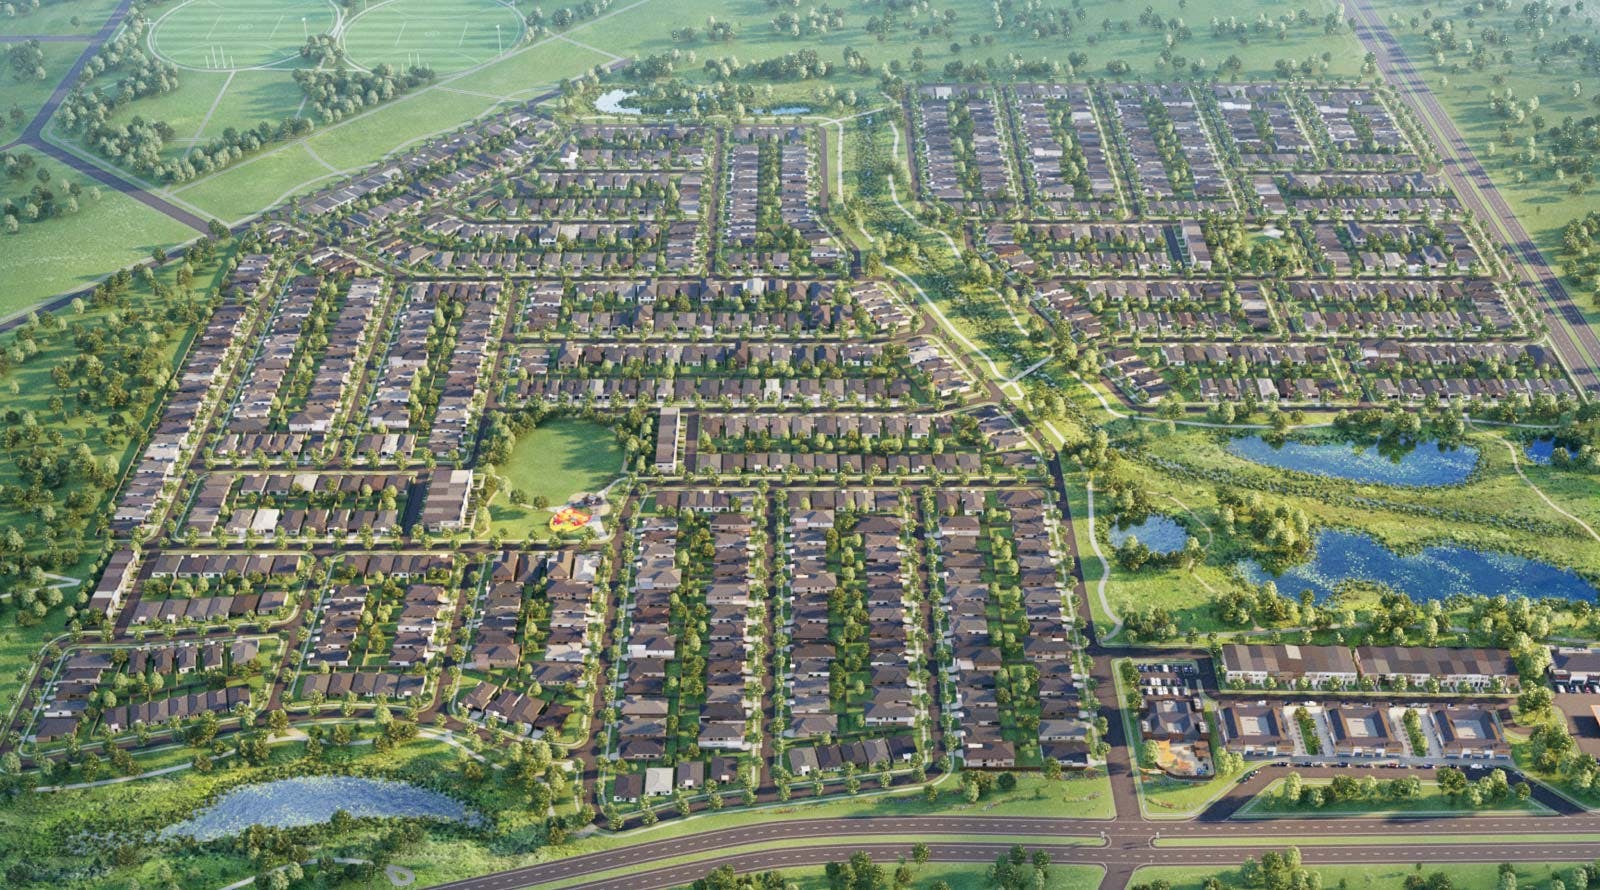 Concept render of aerial view of Marigold